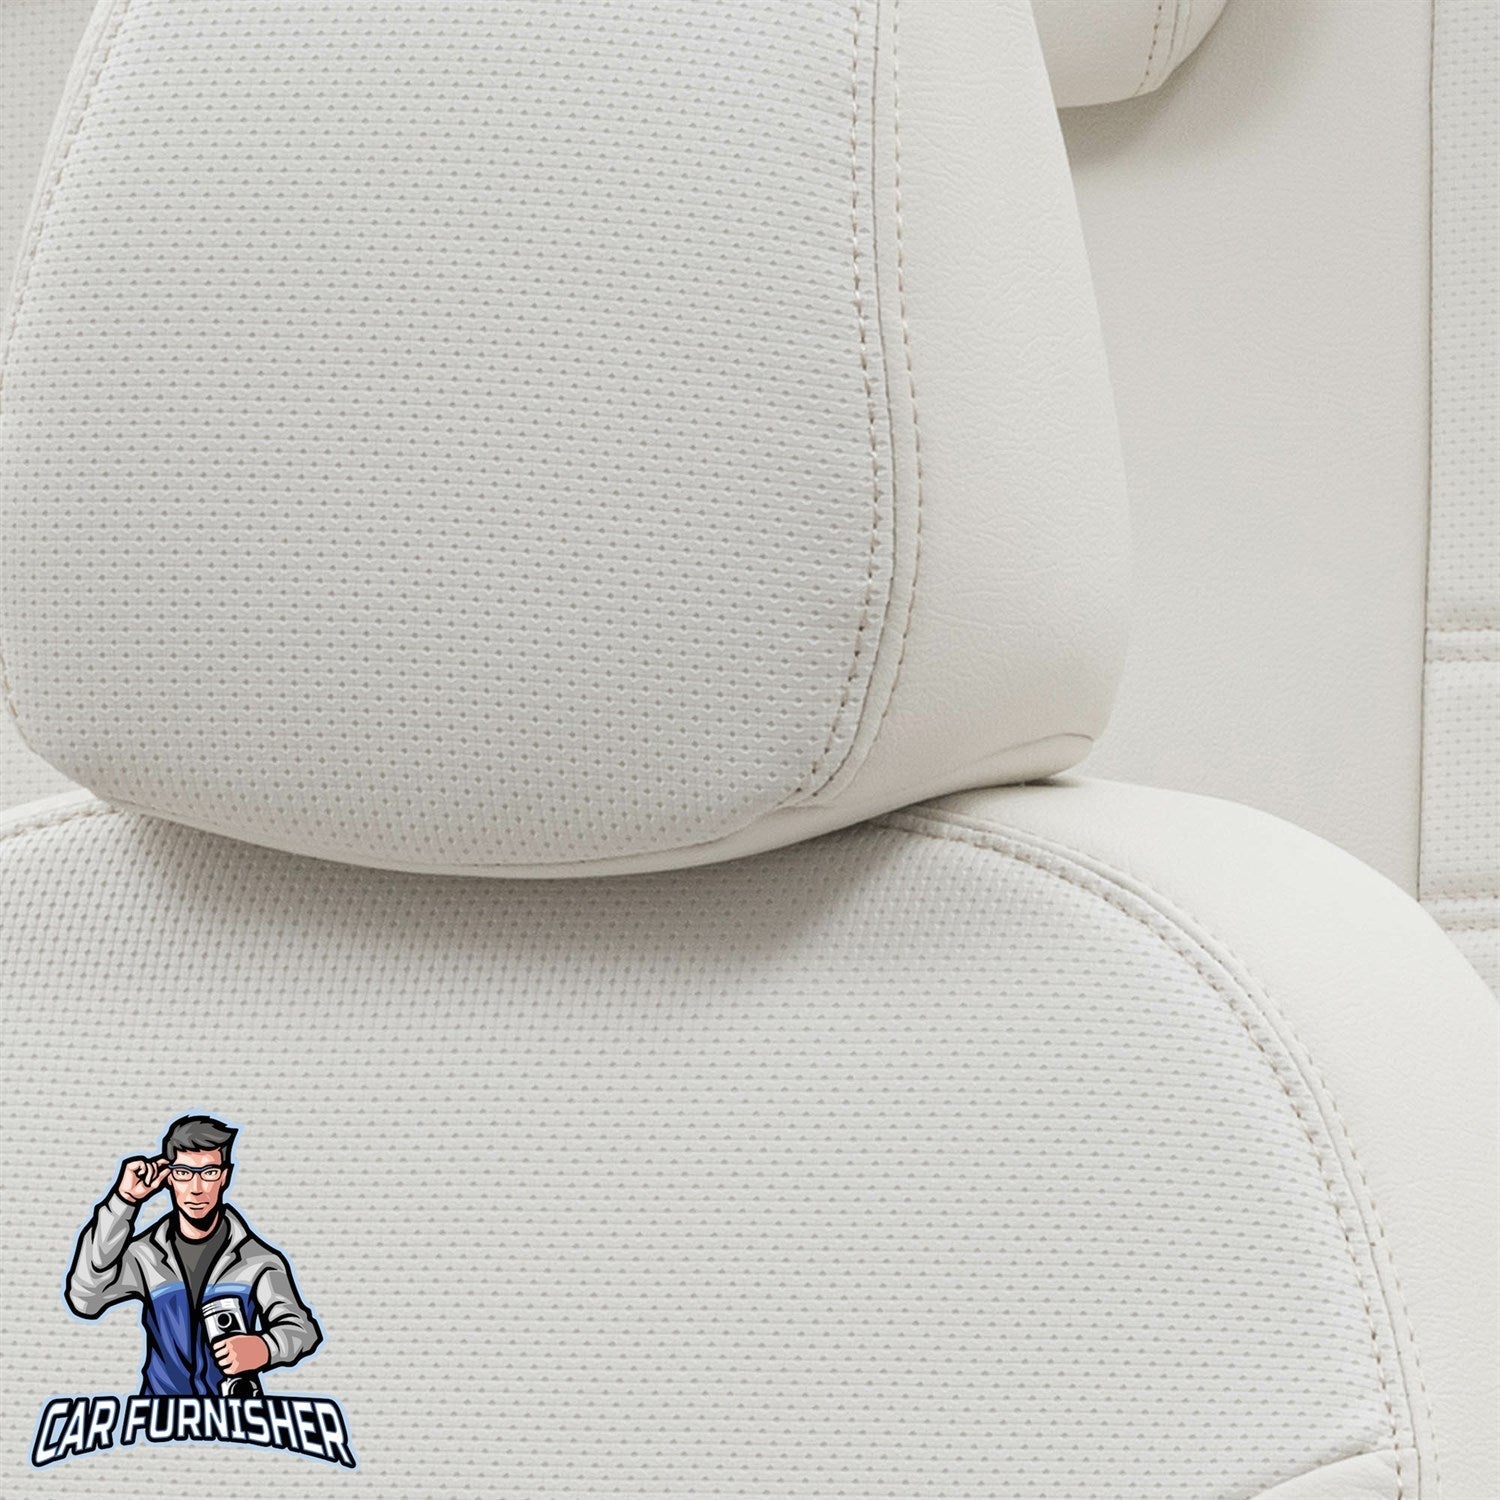 Peugeot 307 Seat Covers New York Leather Design Ivory Leather